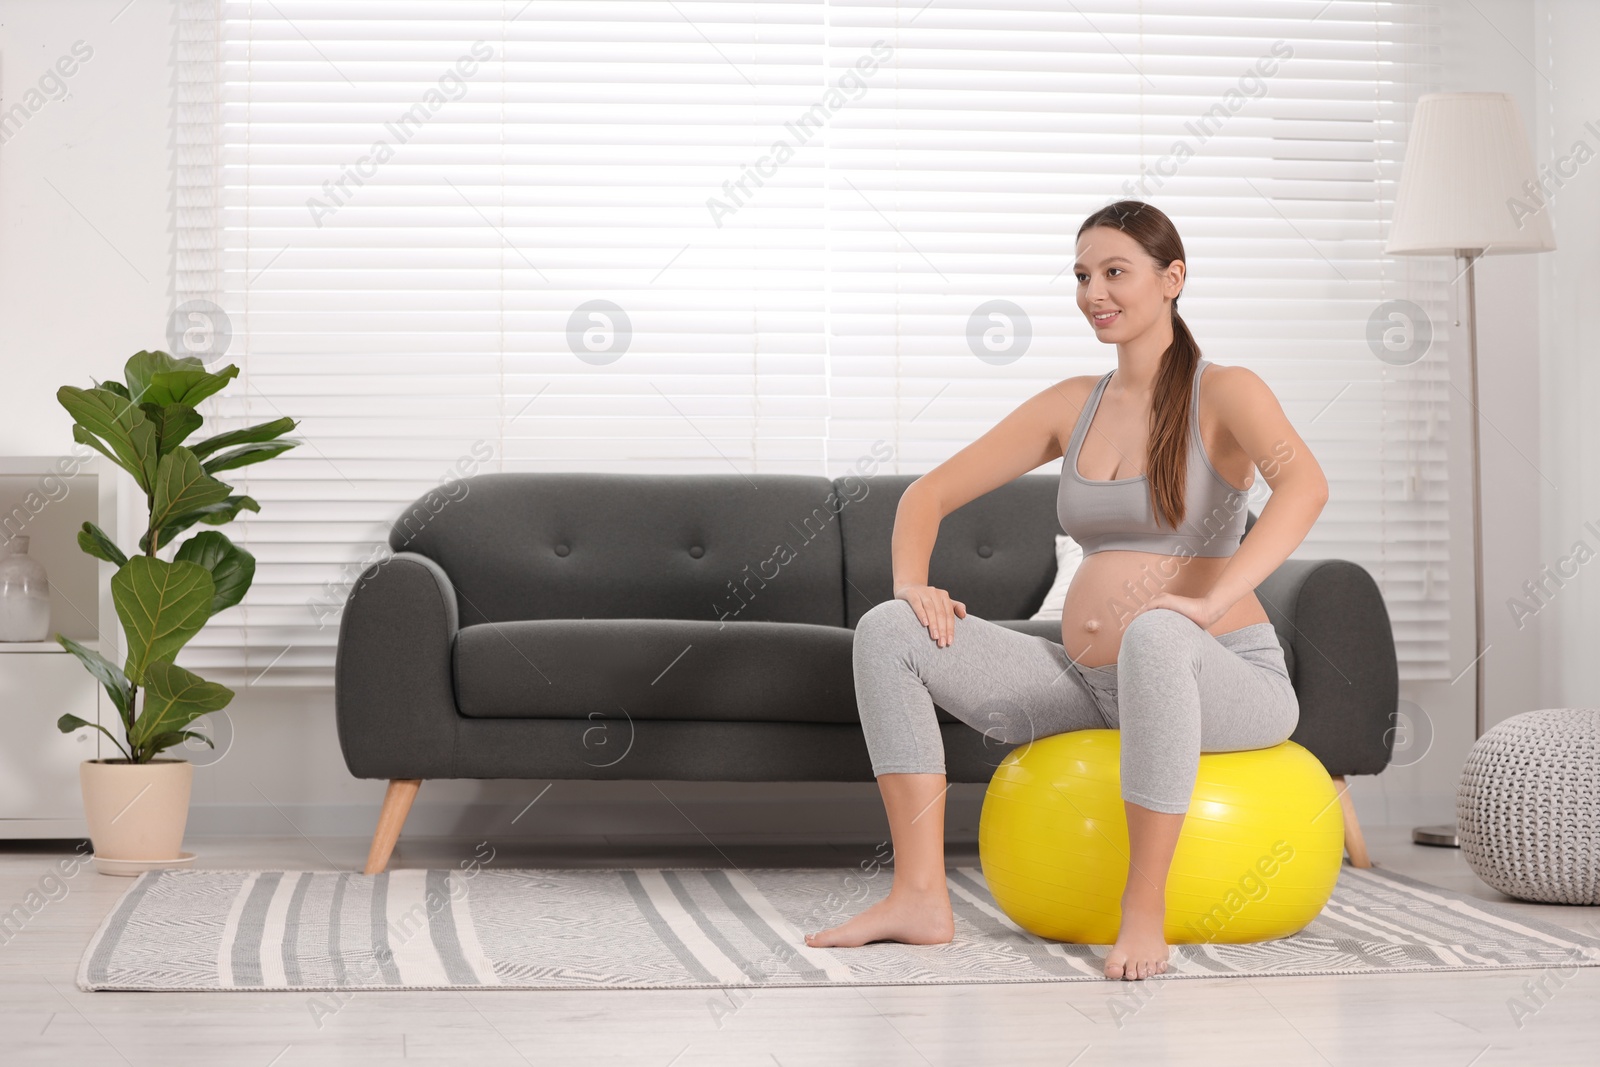 Photo of Pregnant woman sitting on fitness ball in room. Home yoga